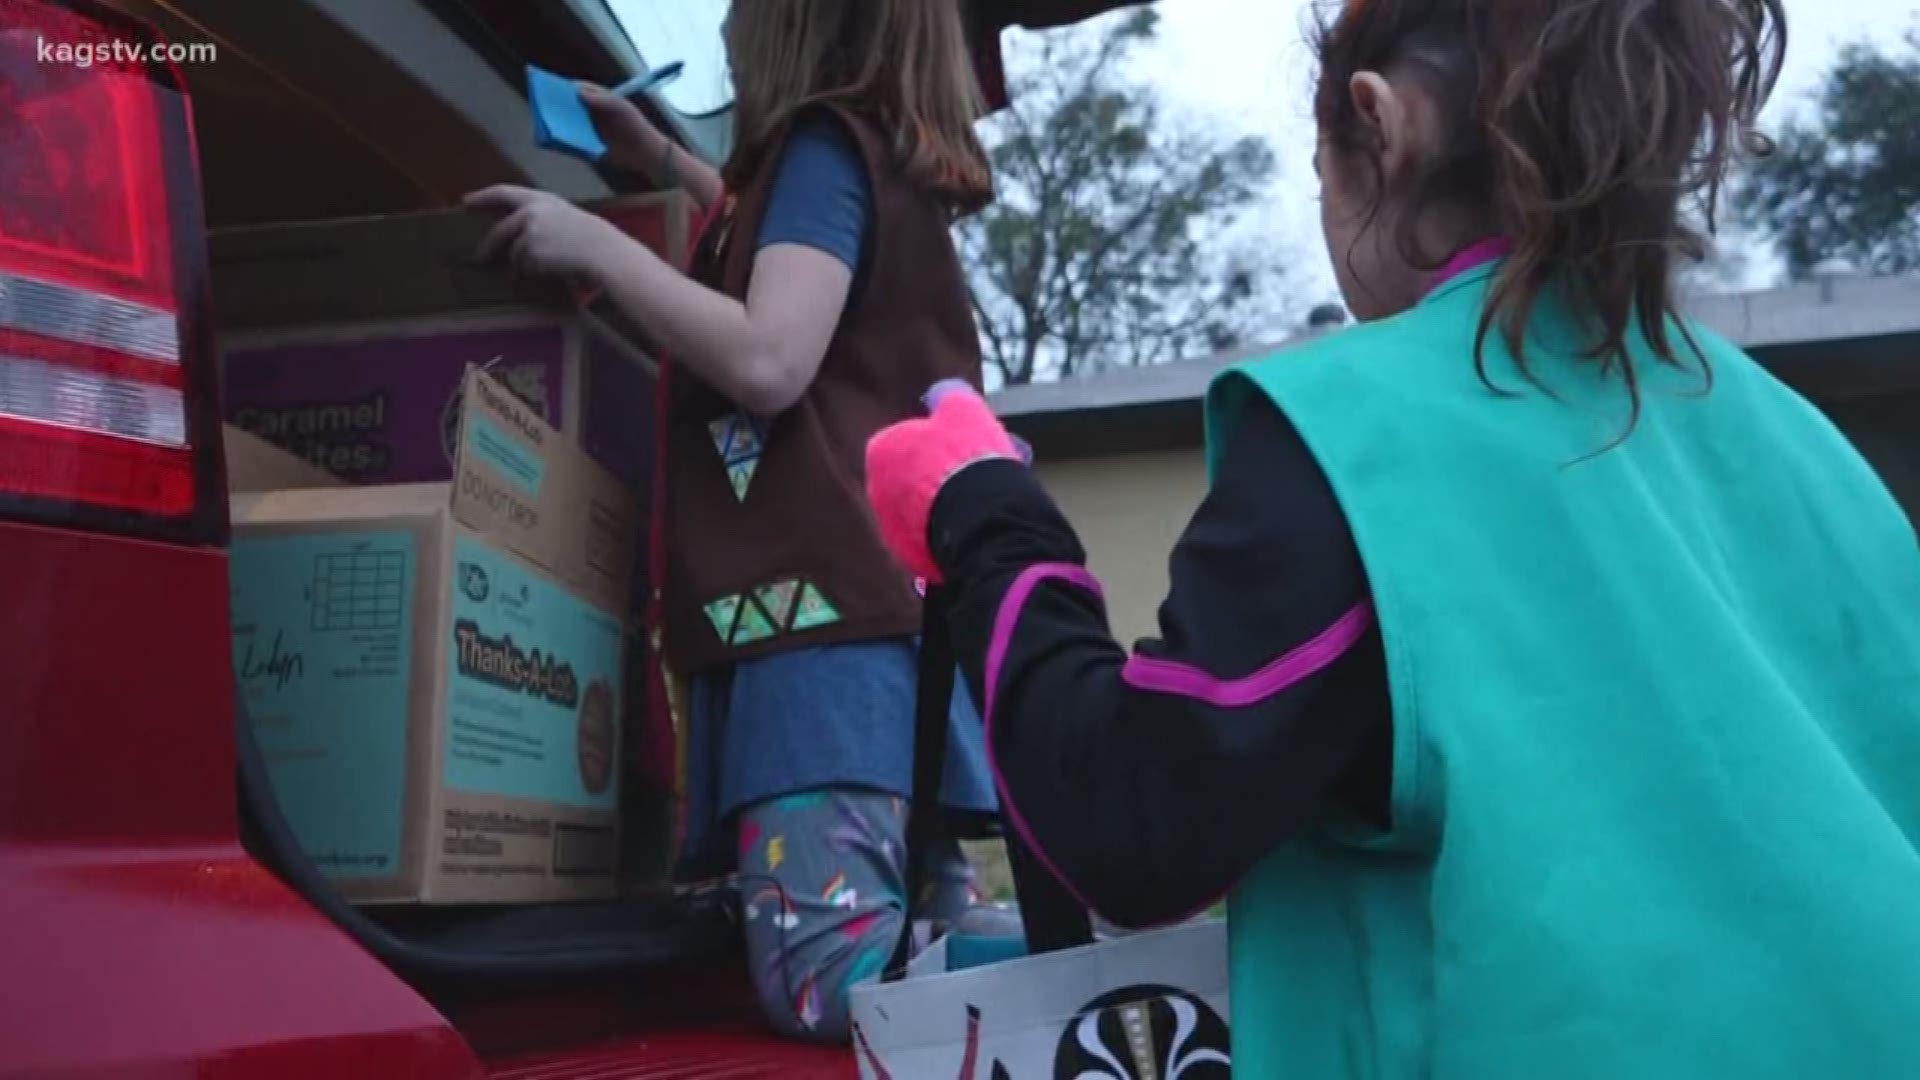 KAGS went door-to-door with Girl Scouts as the first day of cookie selling began.